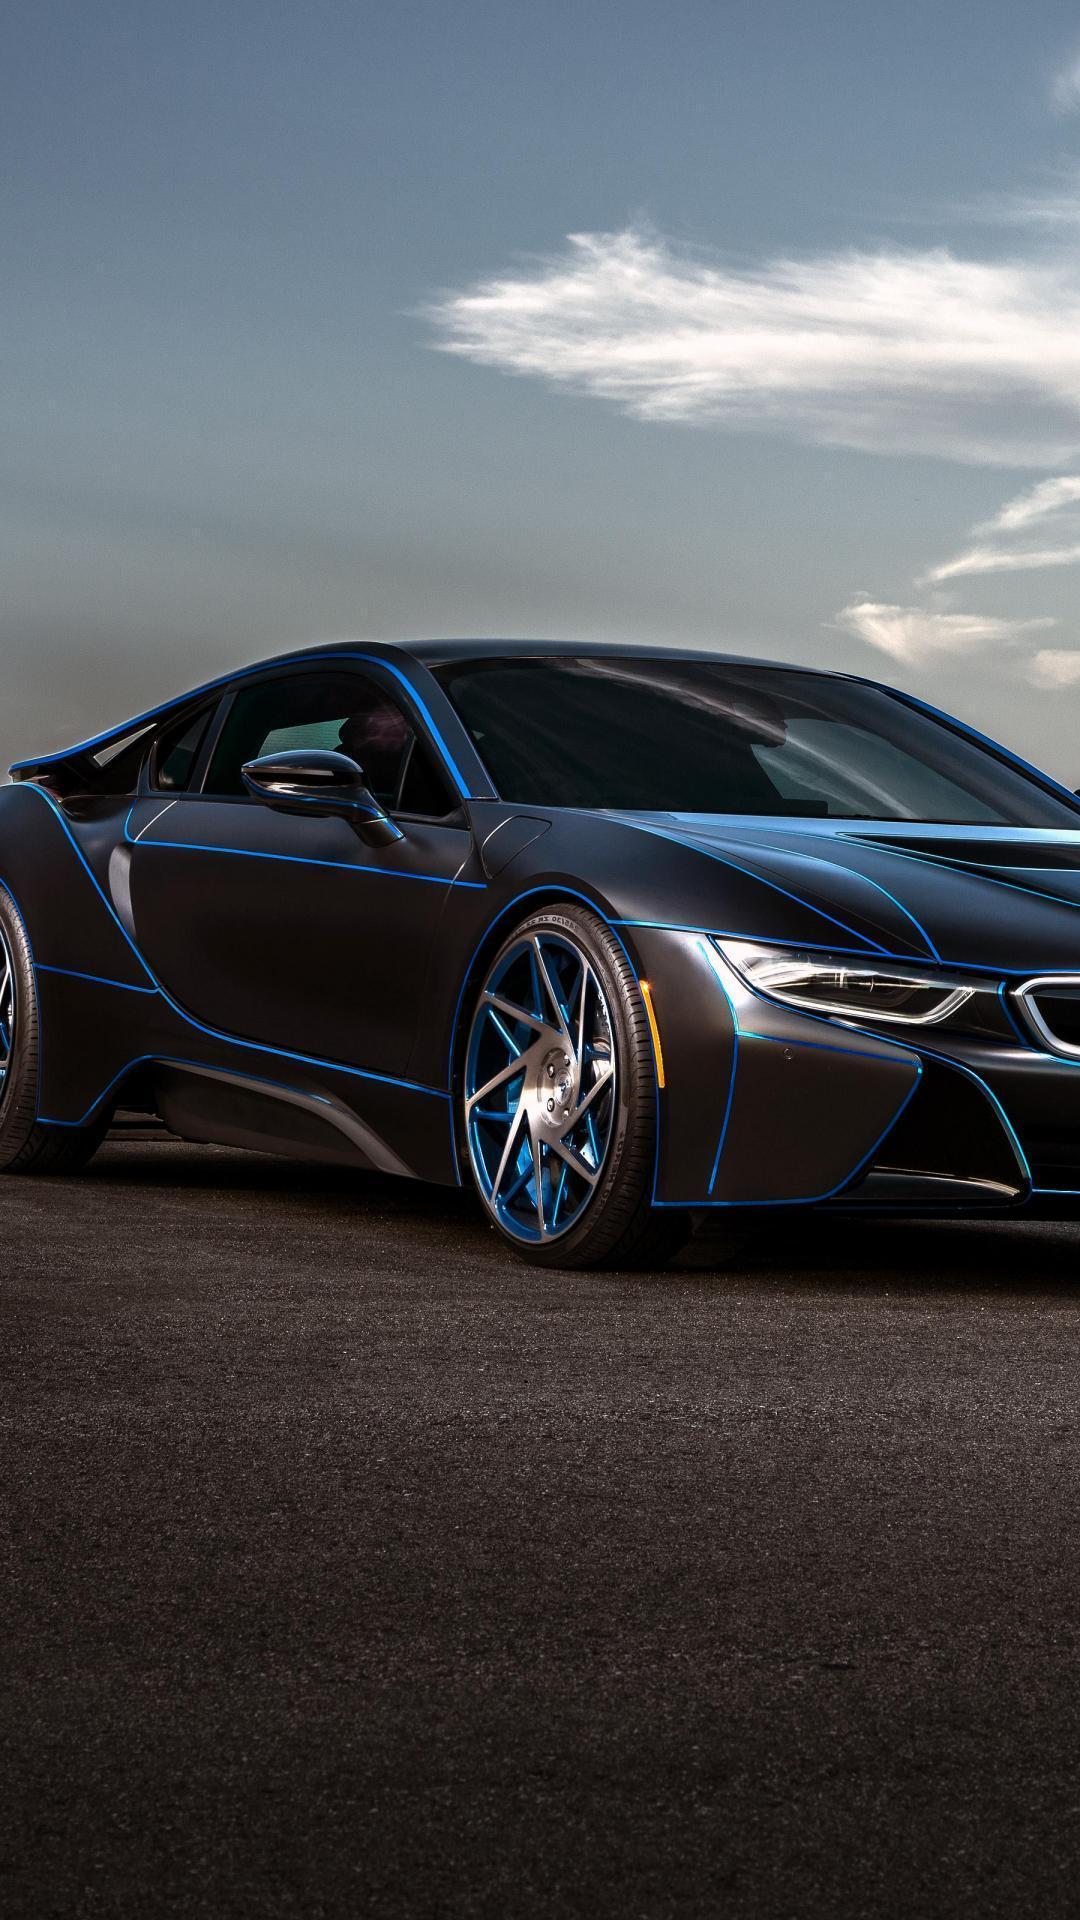 Bmw I8 Wallpaper for iPhone iPhone 7 plus, iPhone 6 plus